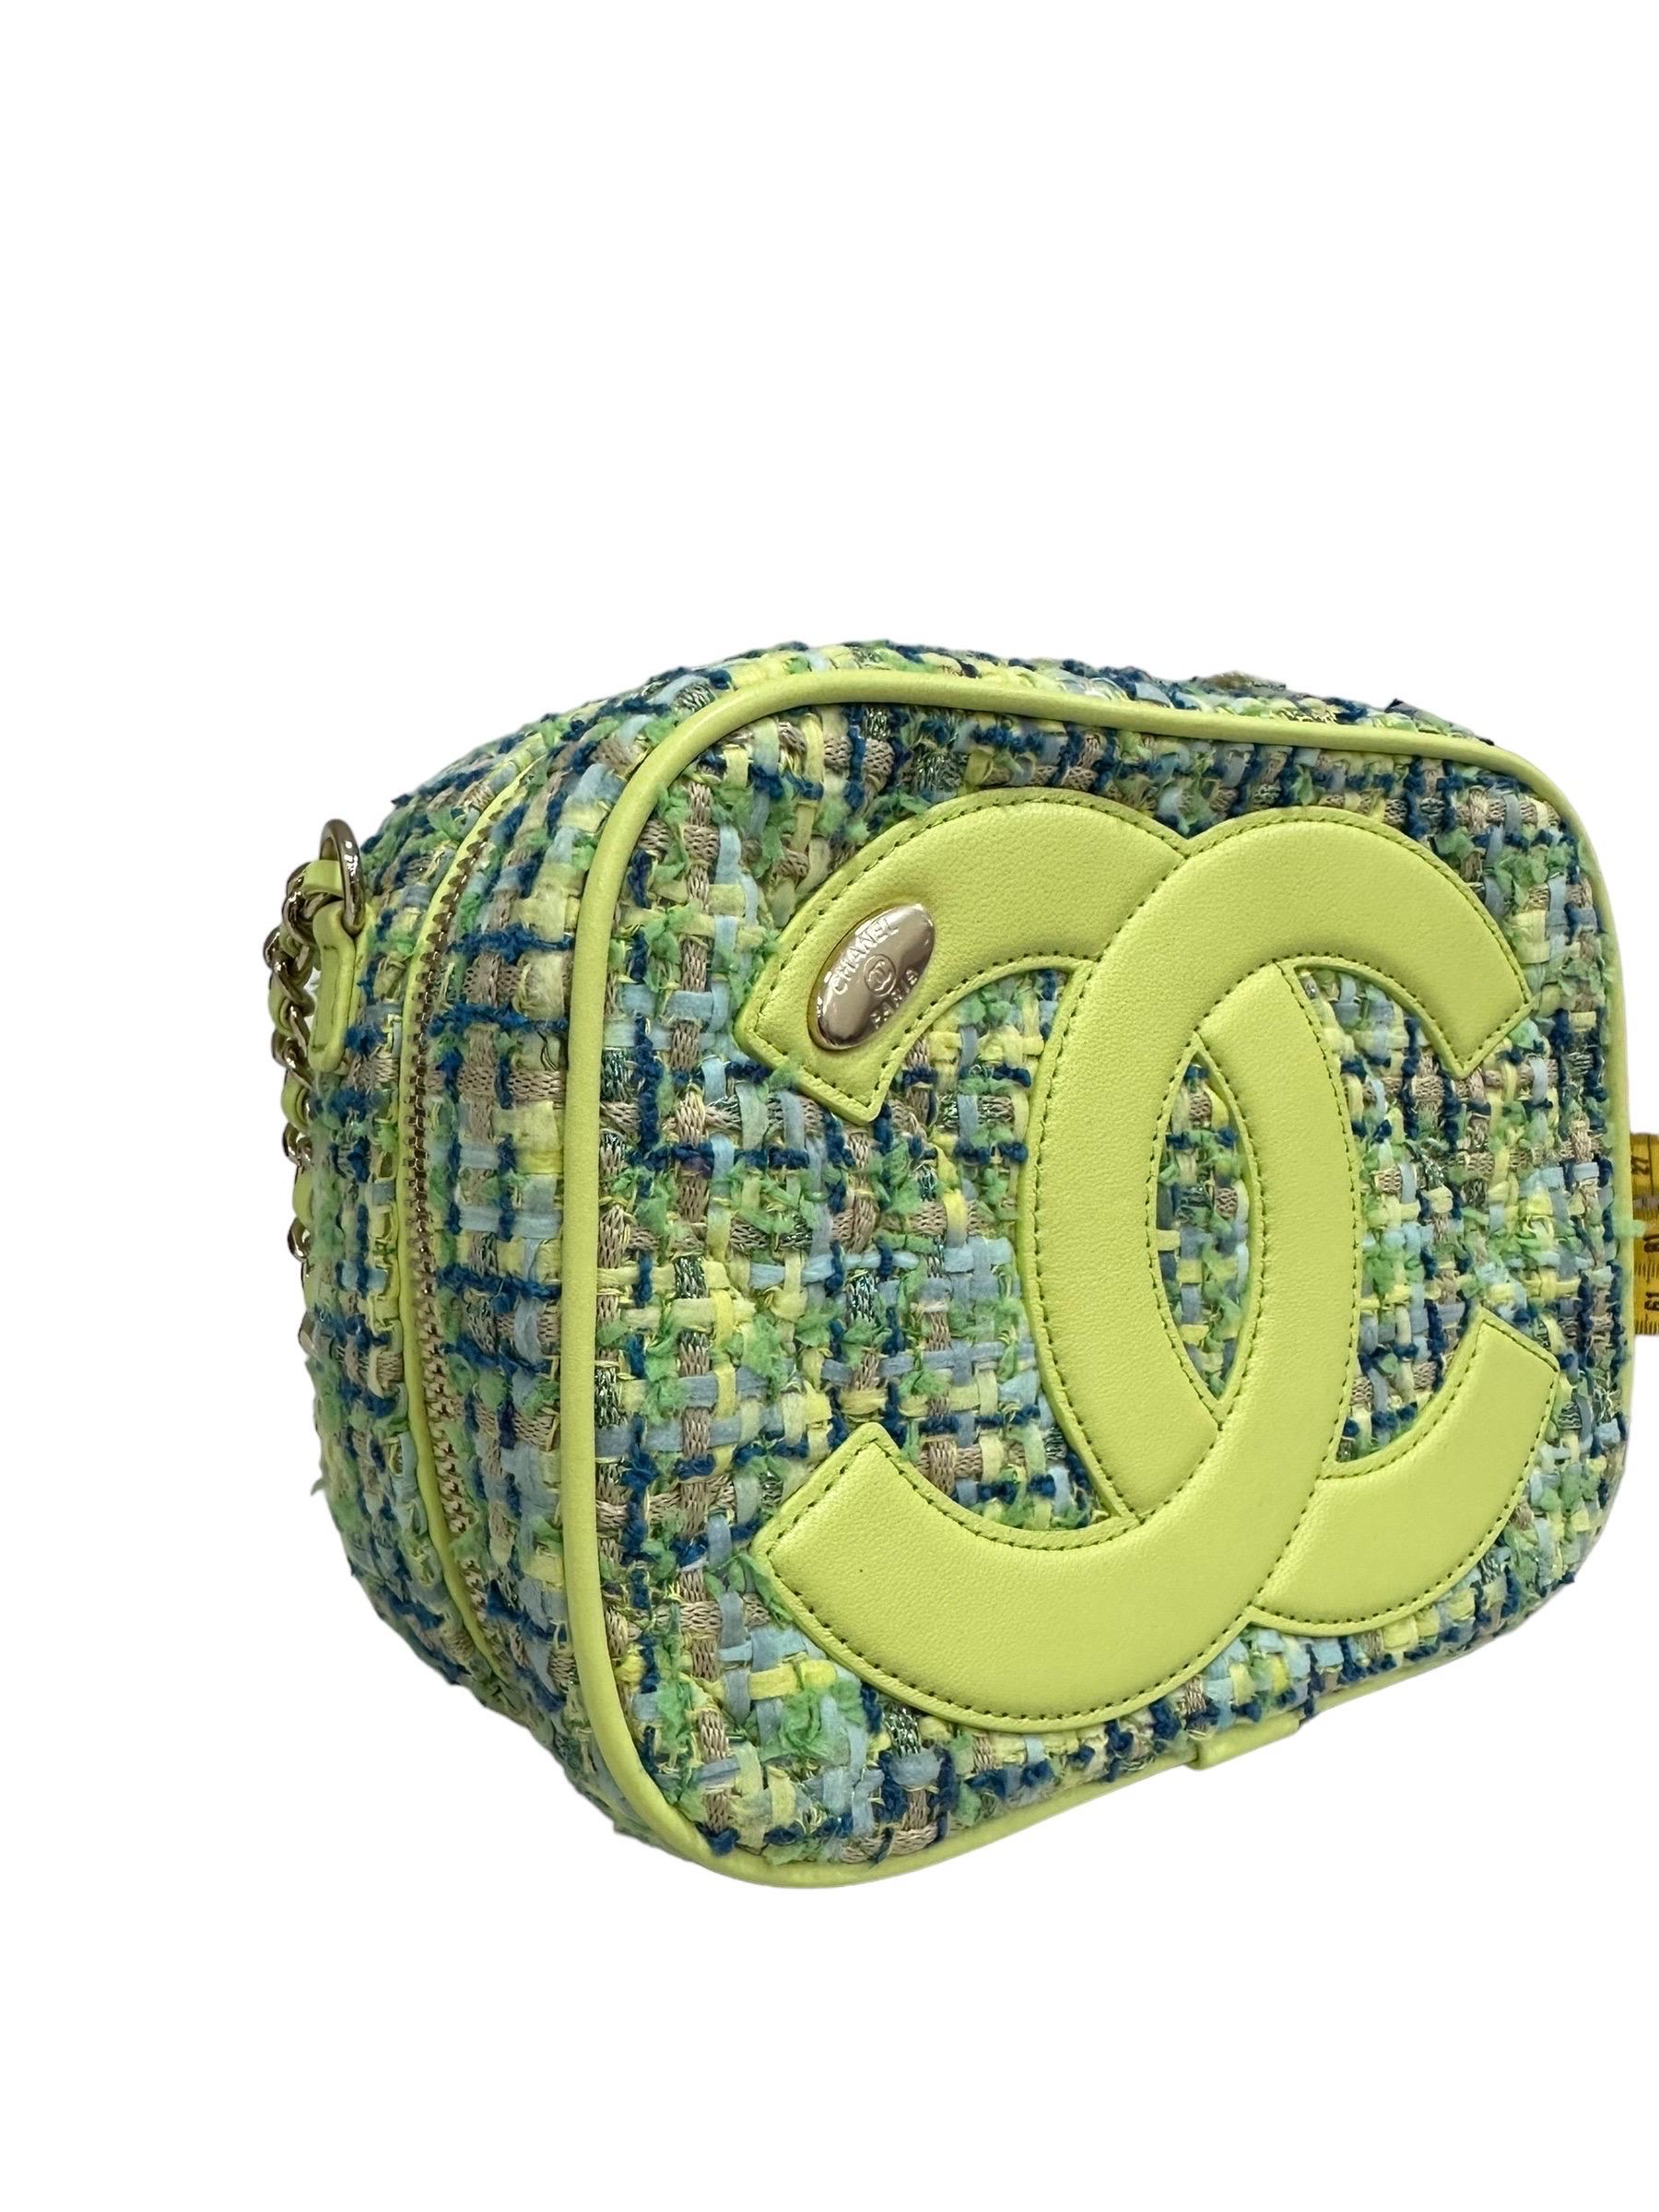 Women's Borsa A Tracolla Chanel Camera Bag Tweed Lime 2019 For Sale